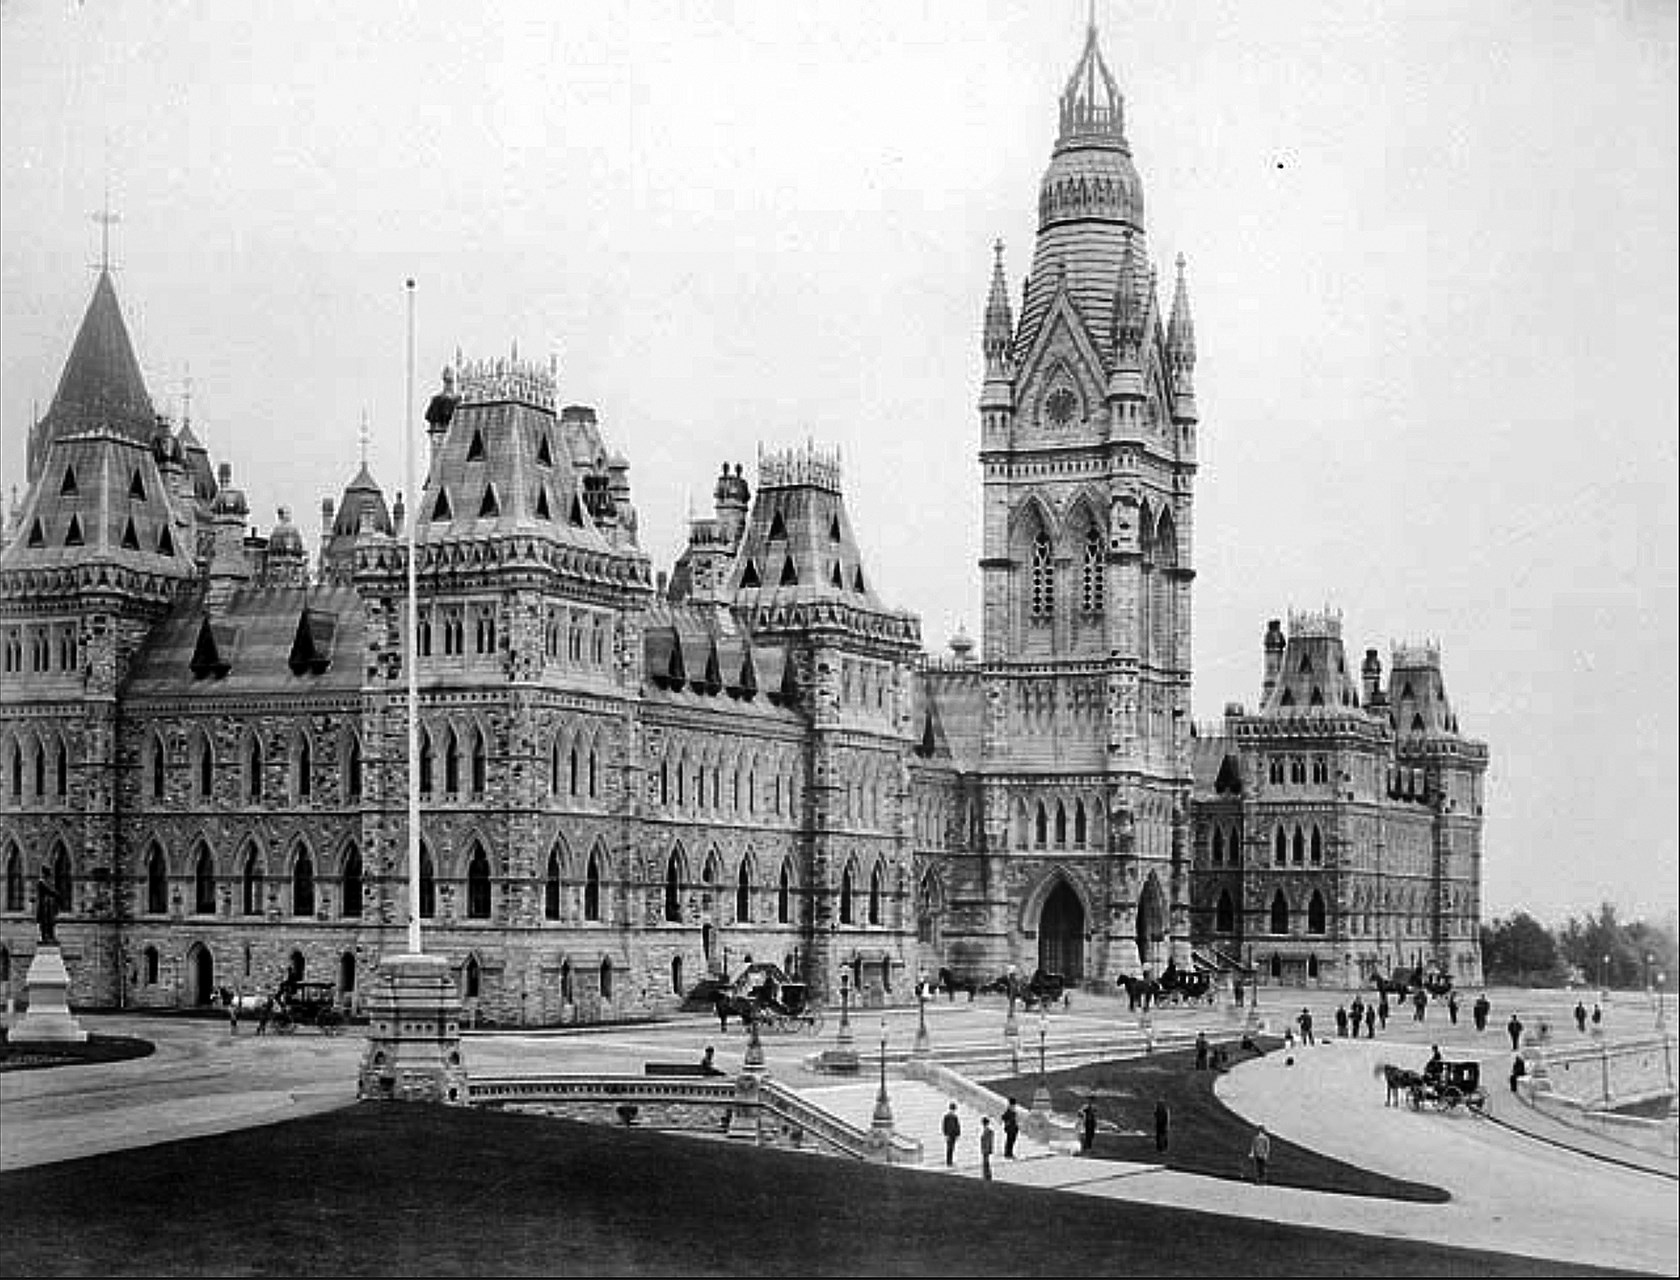 Centre Block’s predecessor, with its ornate 55-metre Victoria Tower, was an internationally recognized symbol of Canada. (Photo credit: Library and Archives Canada)